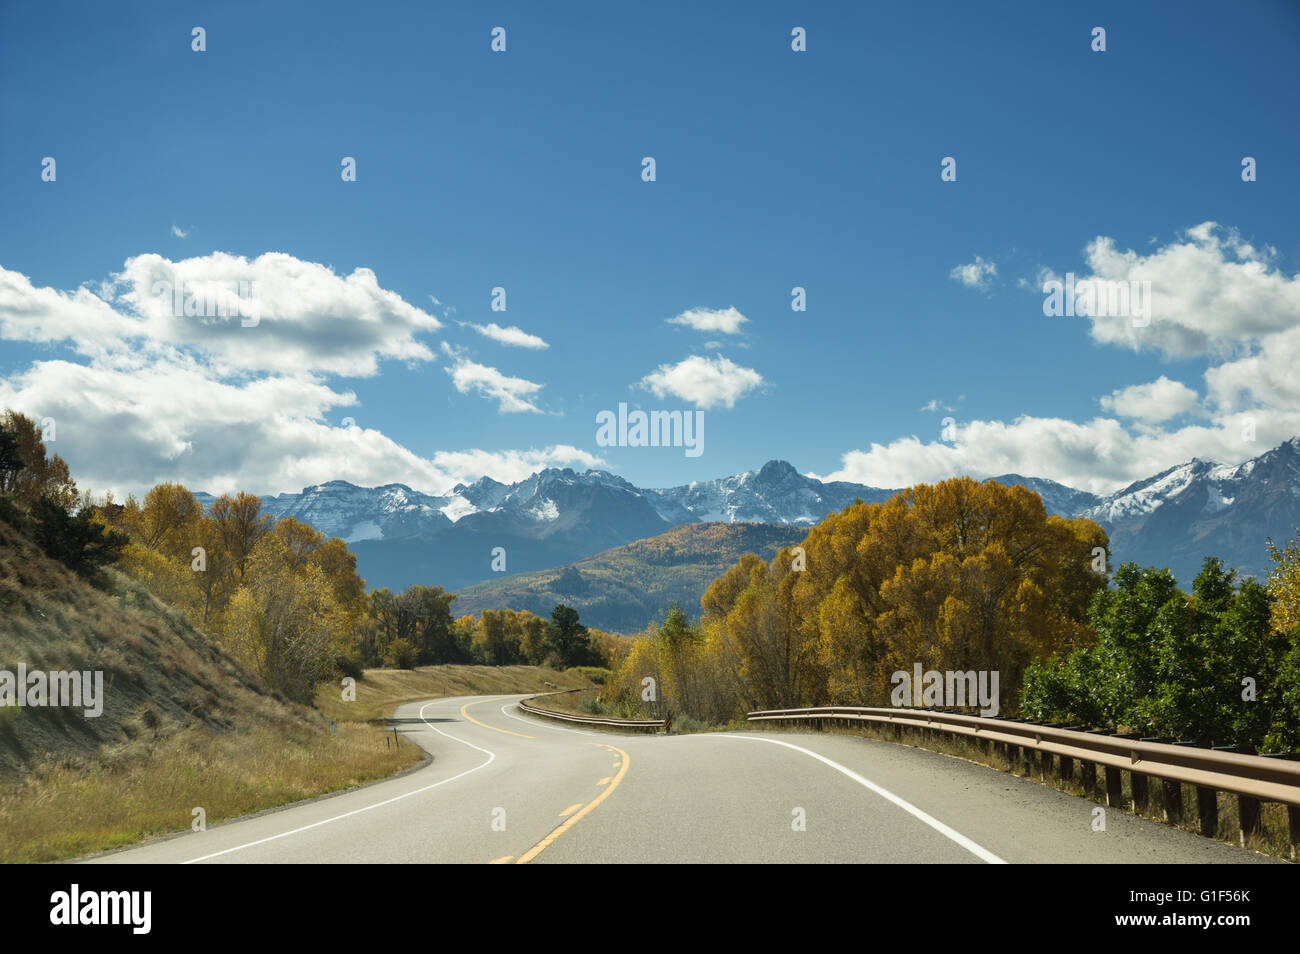 a winding mountain road goes between yellow aspen trees towards distant mountains Stock Photo